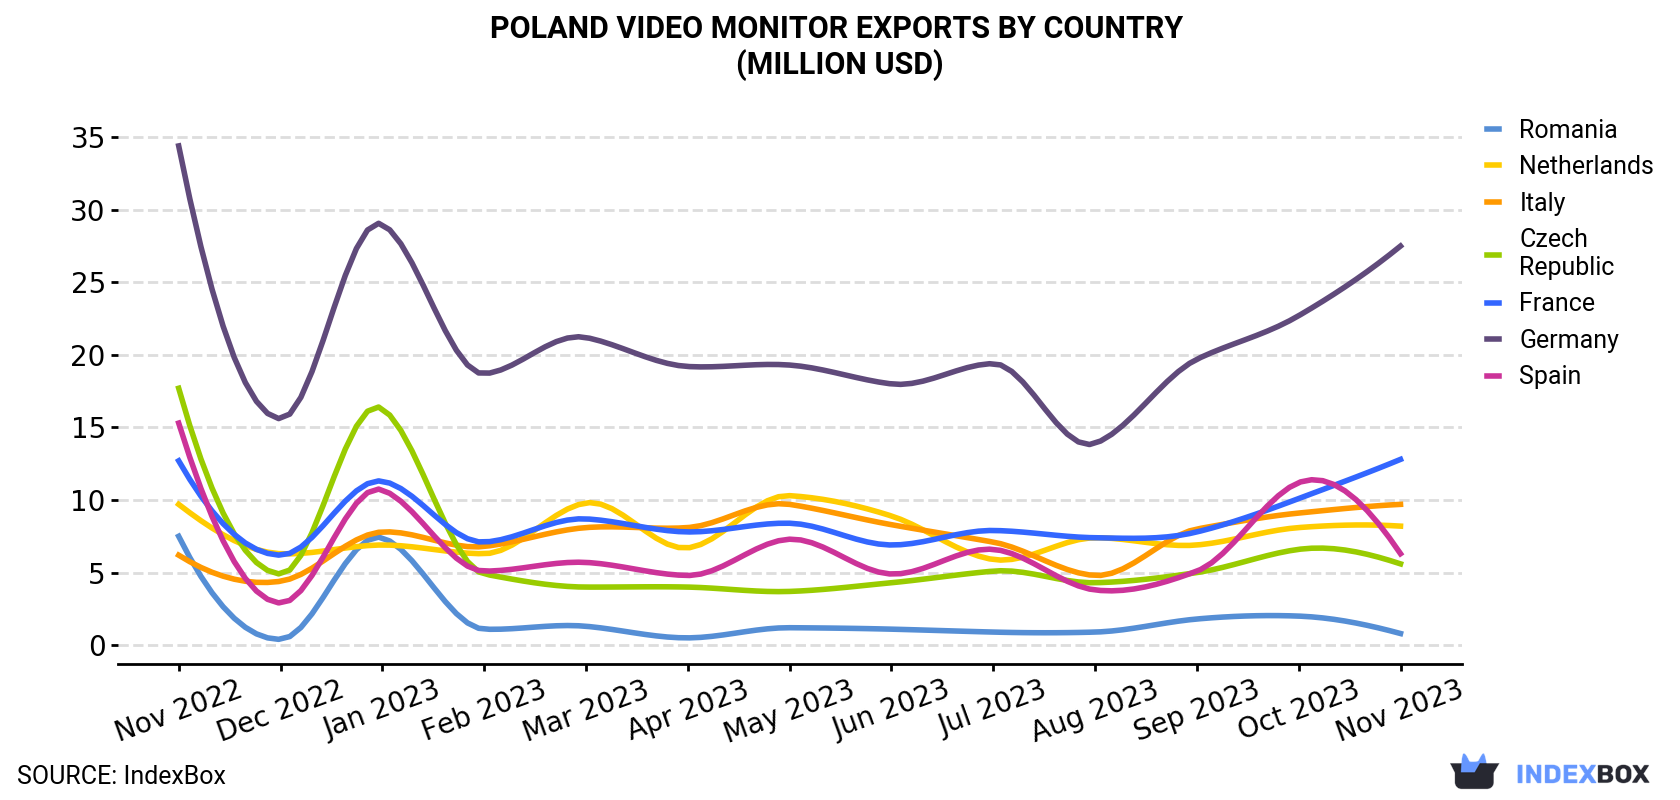 Poland Video Monitor Exports By Country (Million USD)